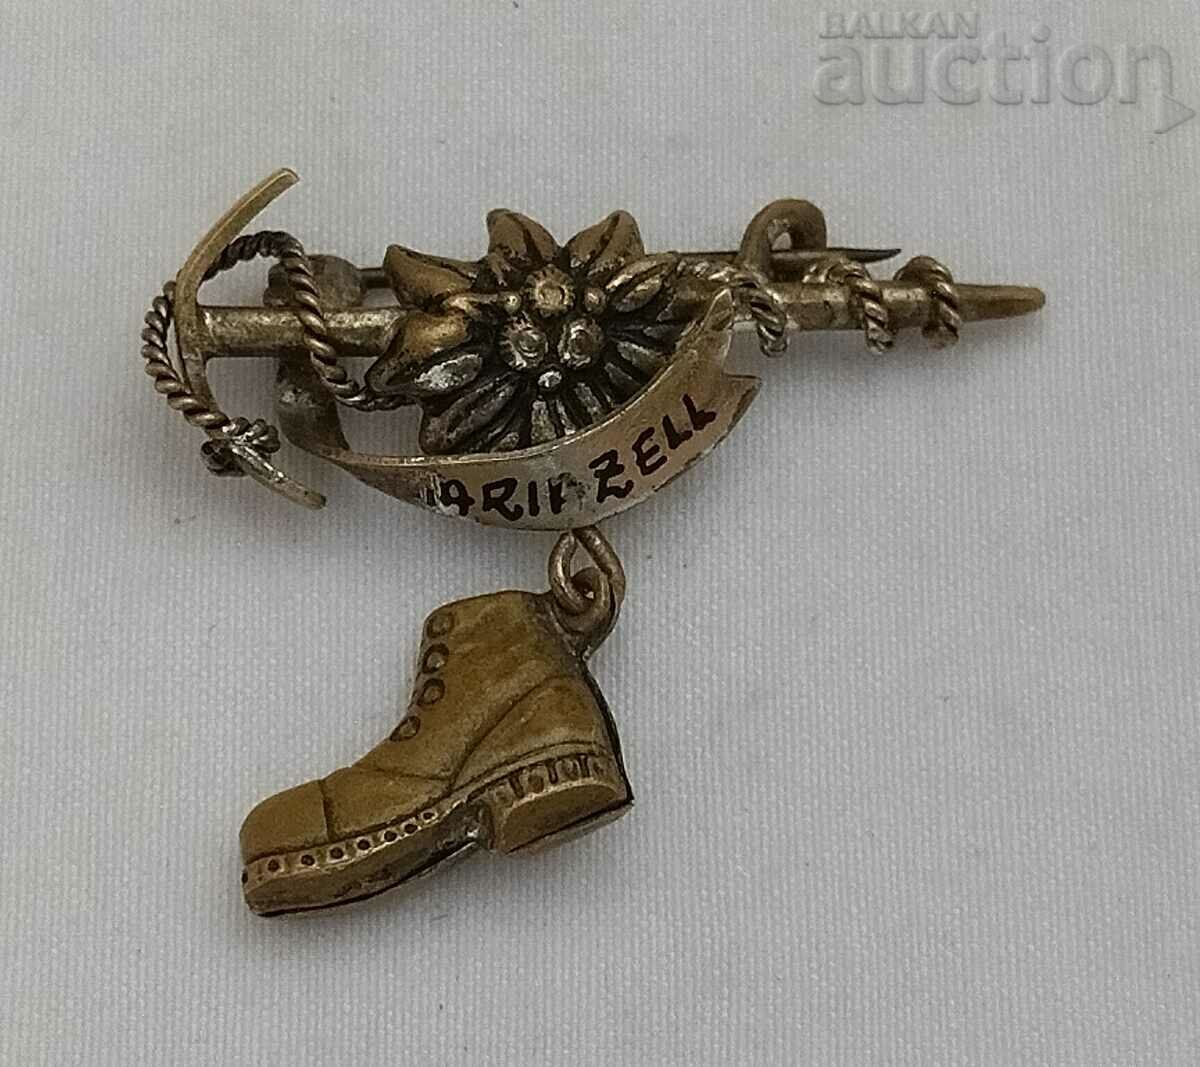 TOURISM EDELWEISS PICKEL SHOE BADGE